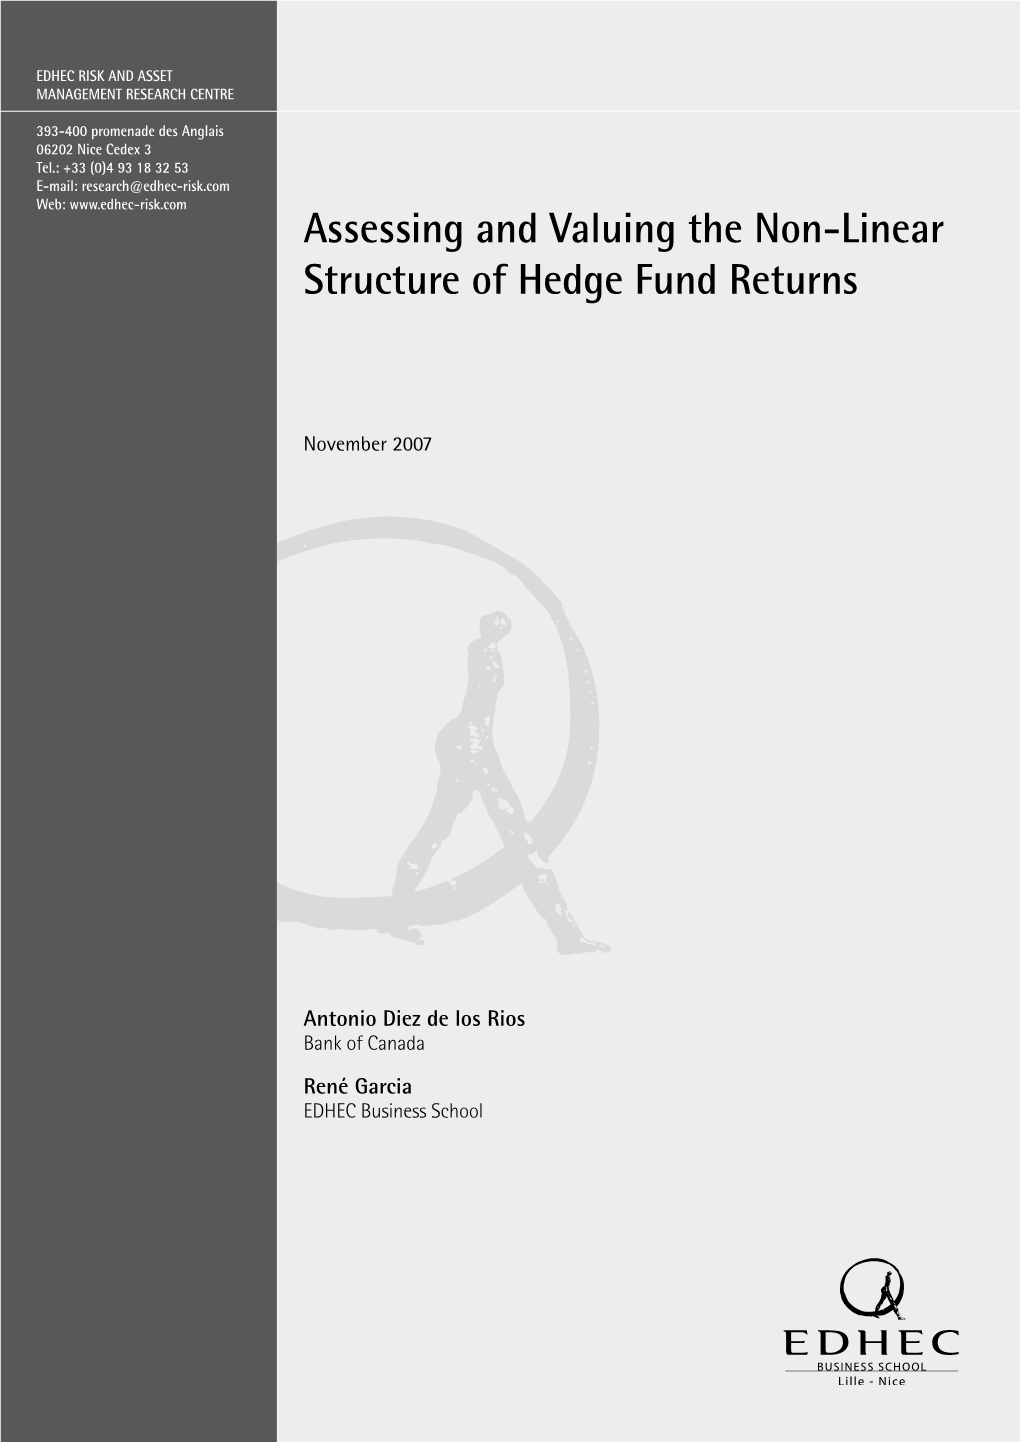 Assessing and Valuing the Non-Linear Structure of Hedge Fund Returns